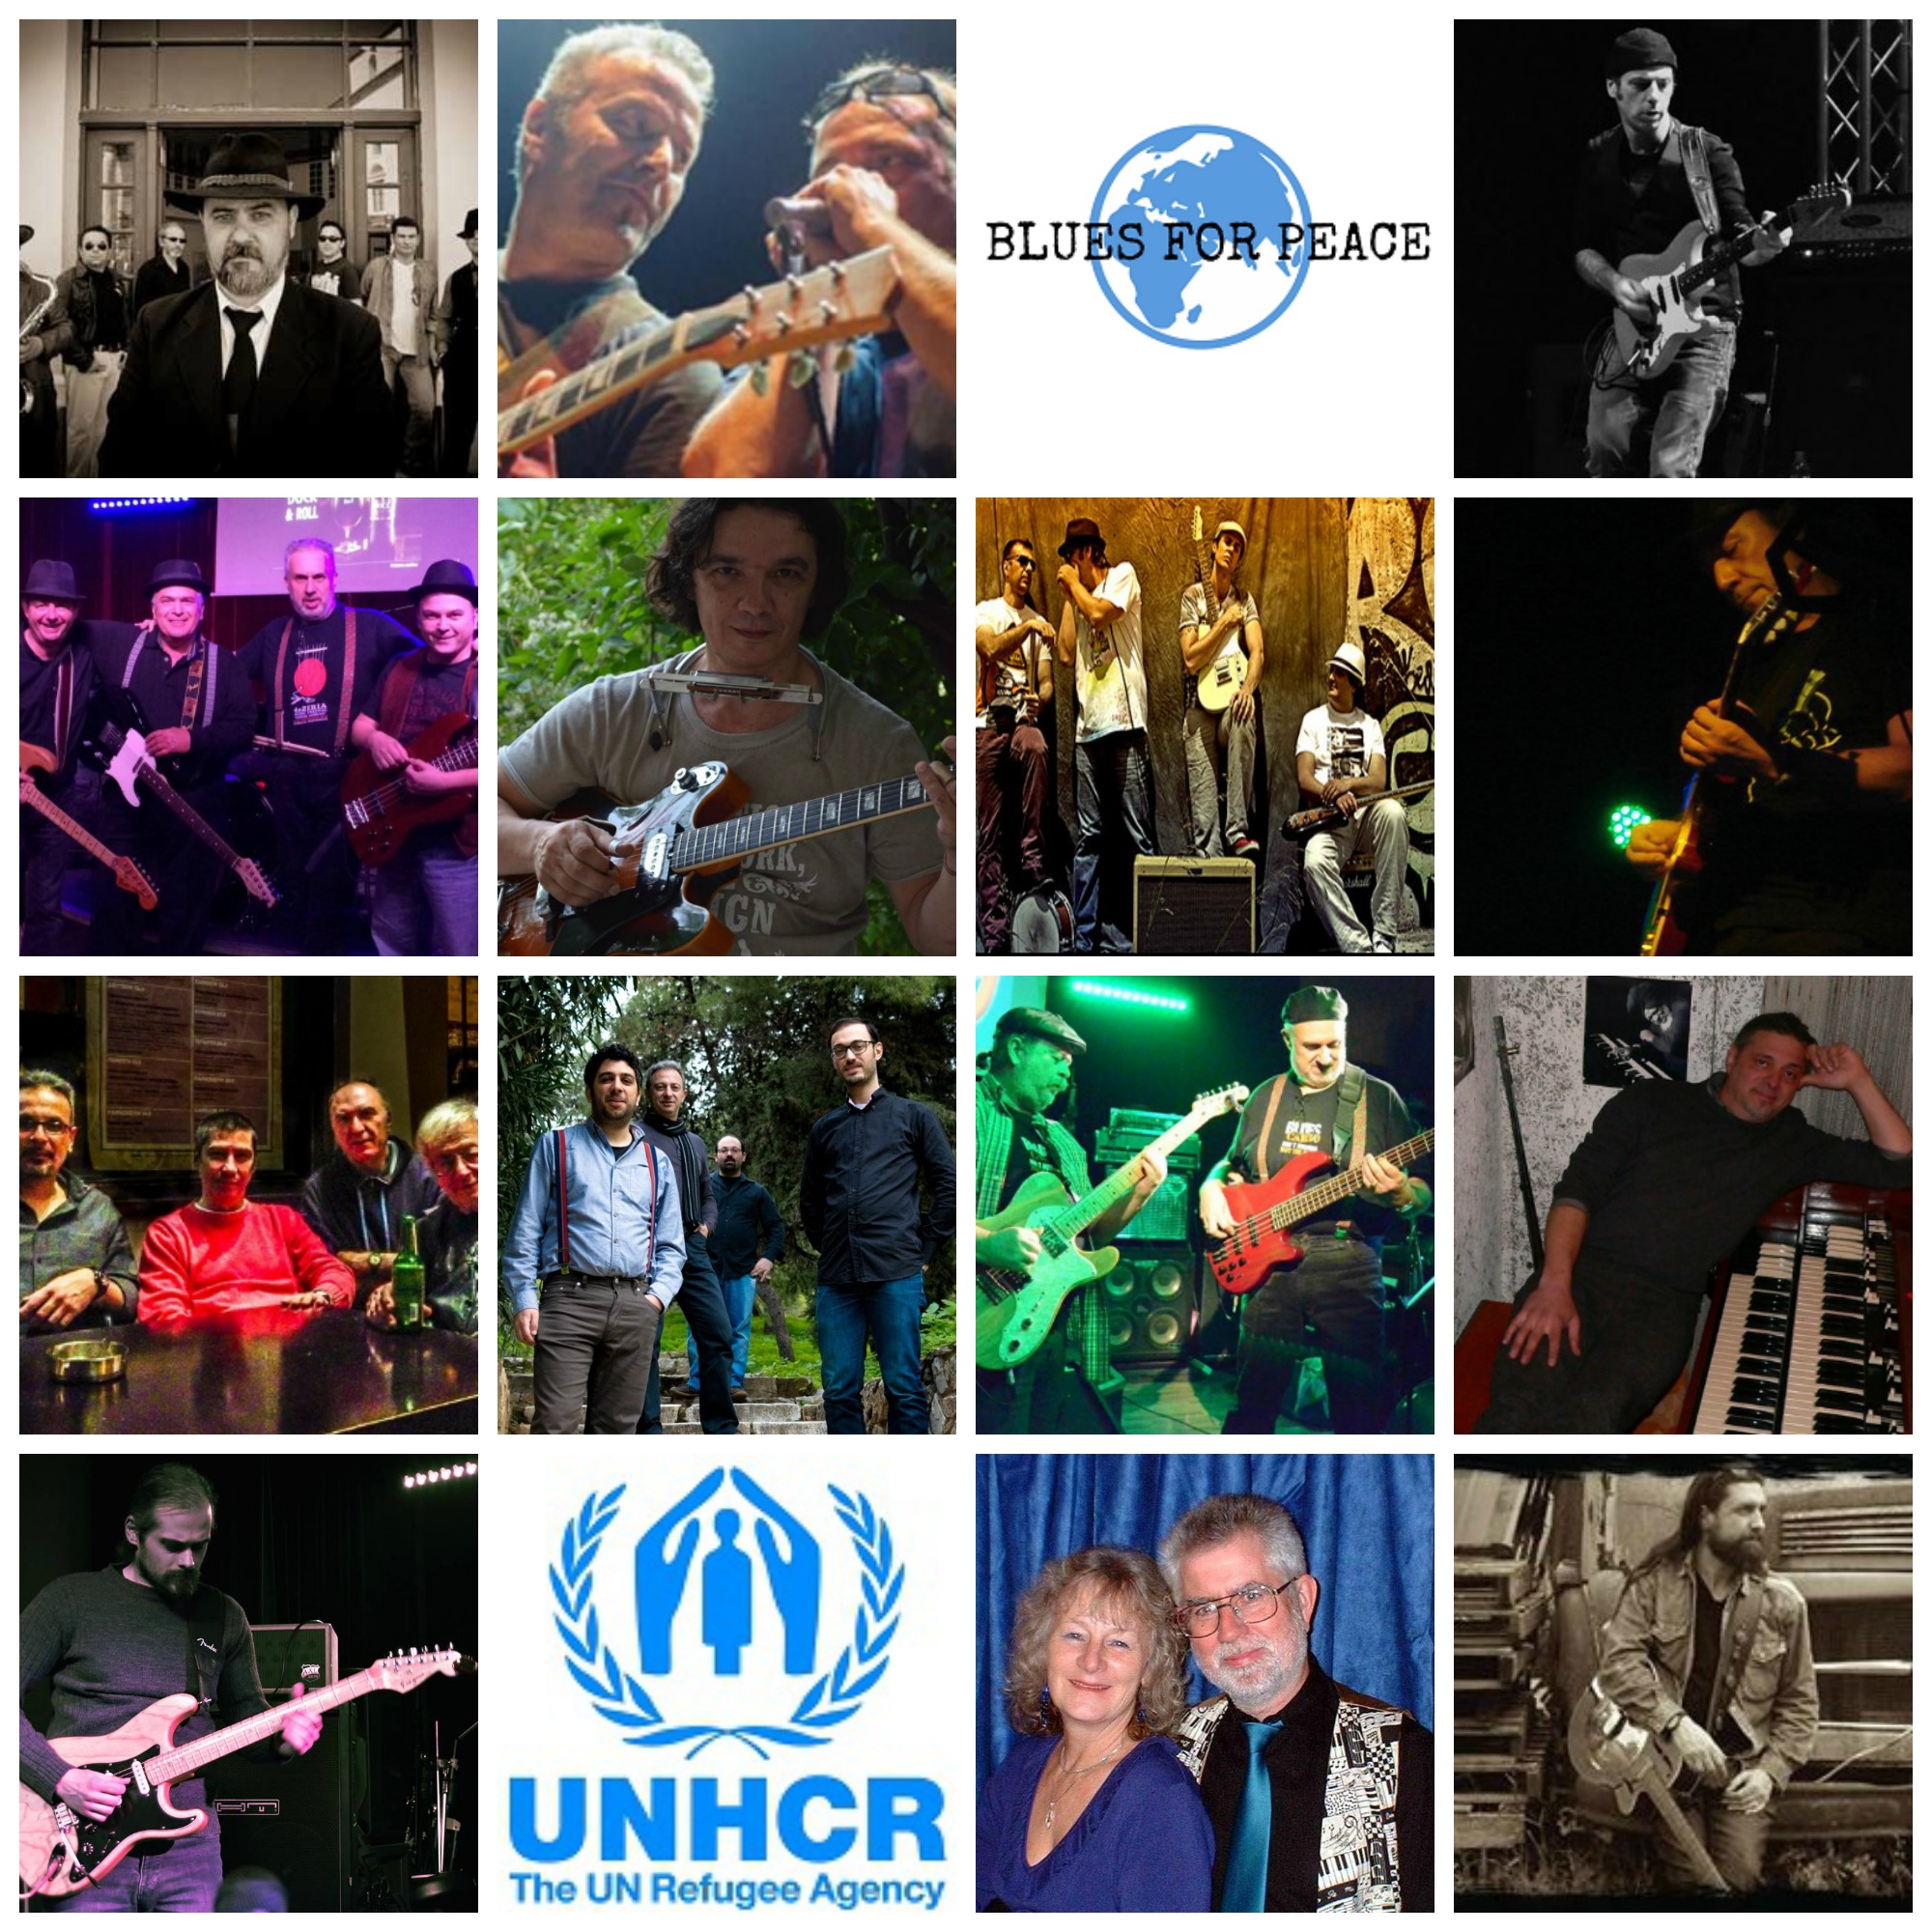 27, 28, 29, 30.05.2016 – Blues For Peace